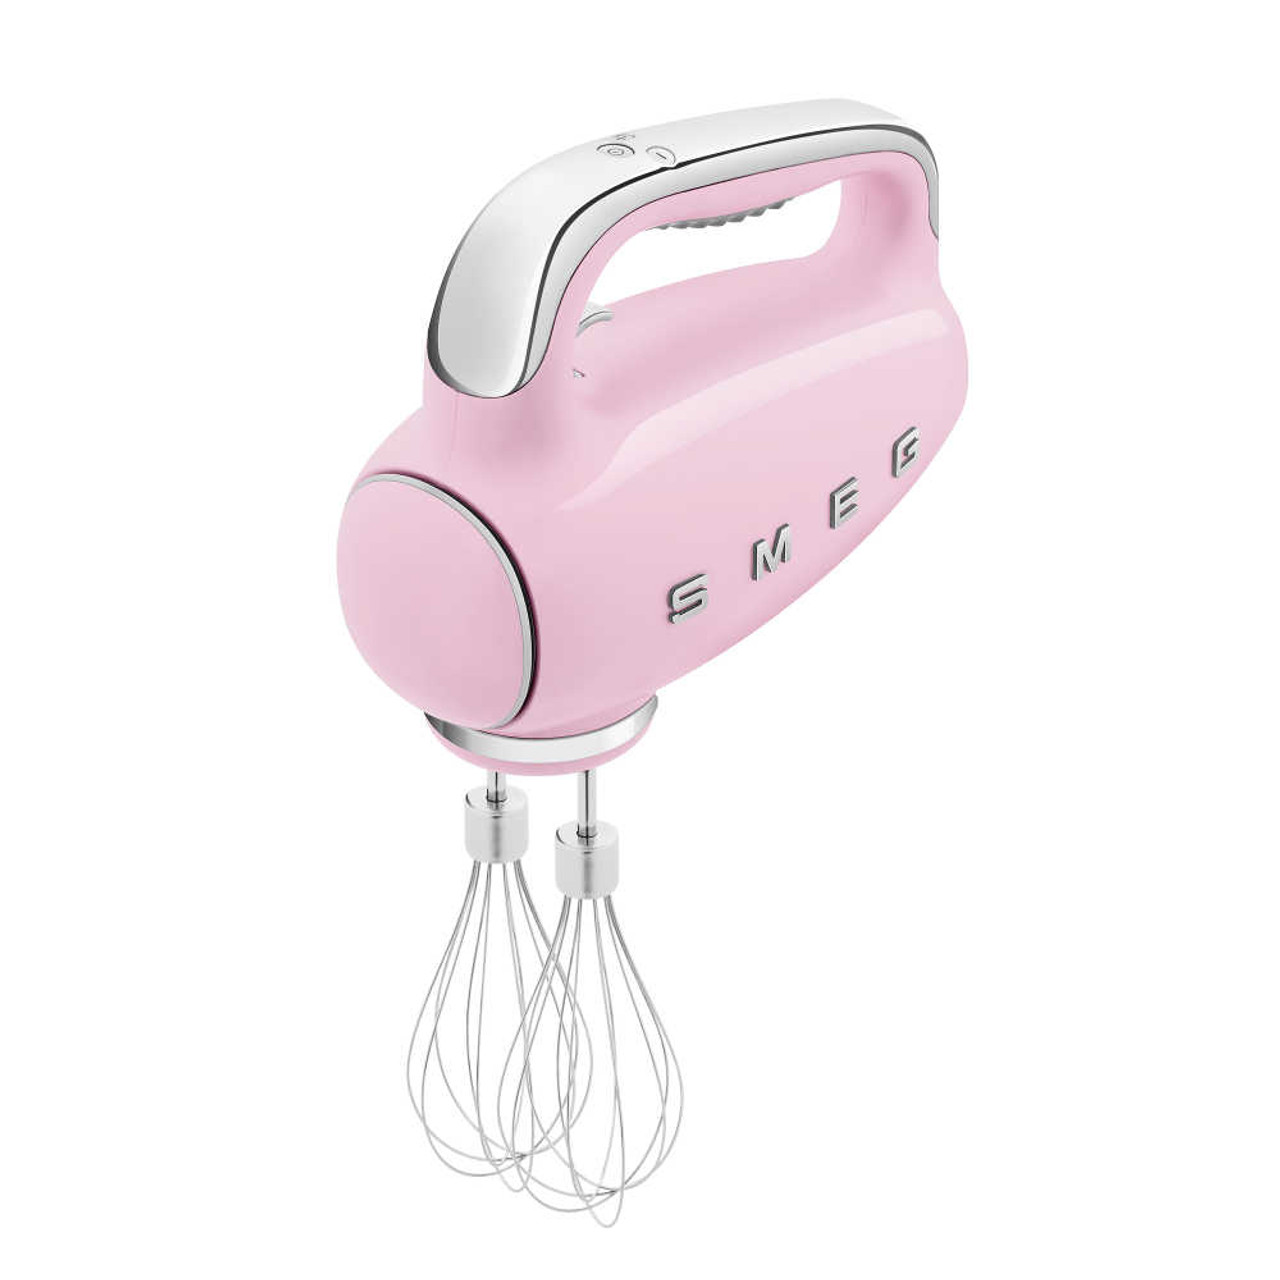 Smeg Hand Mixer Review - Forbes Vetted